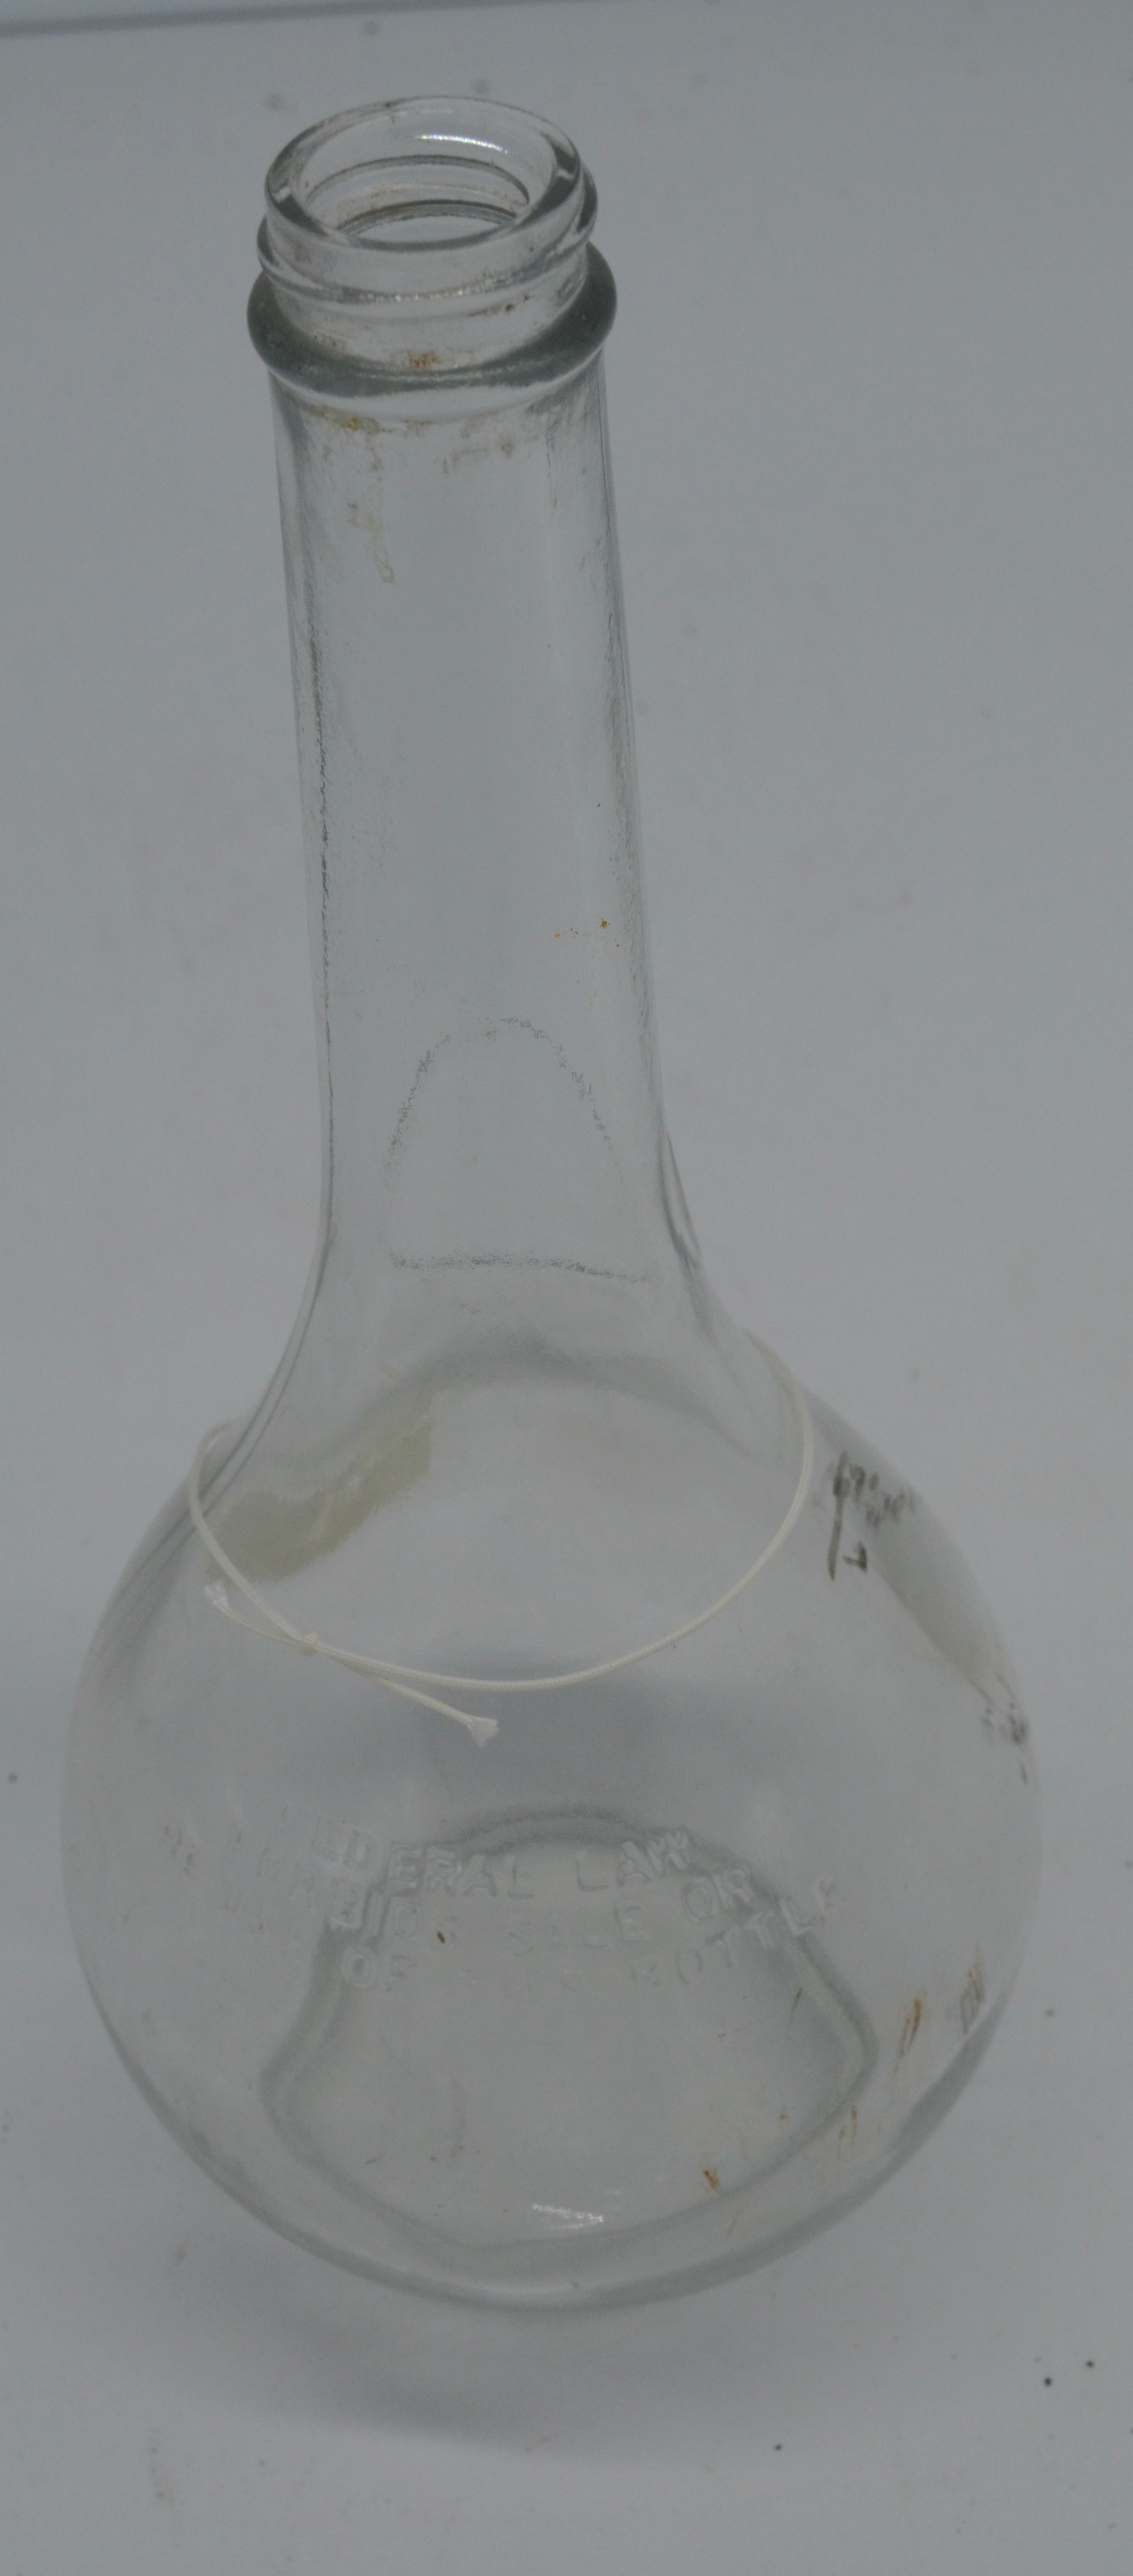 glass%20bottle%20with%20elongated%20neck